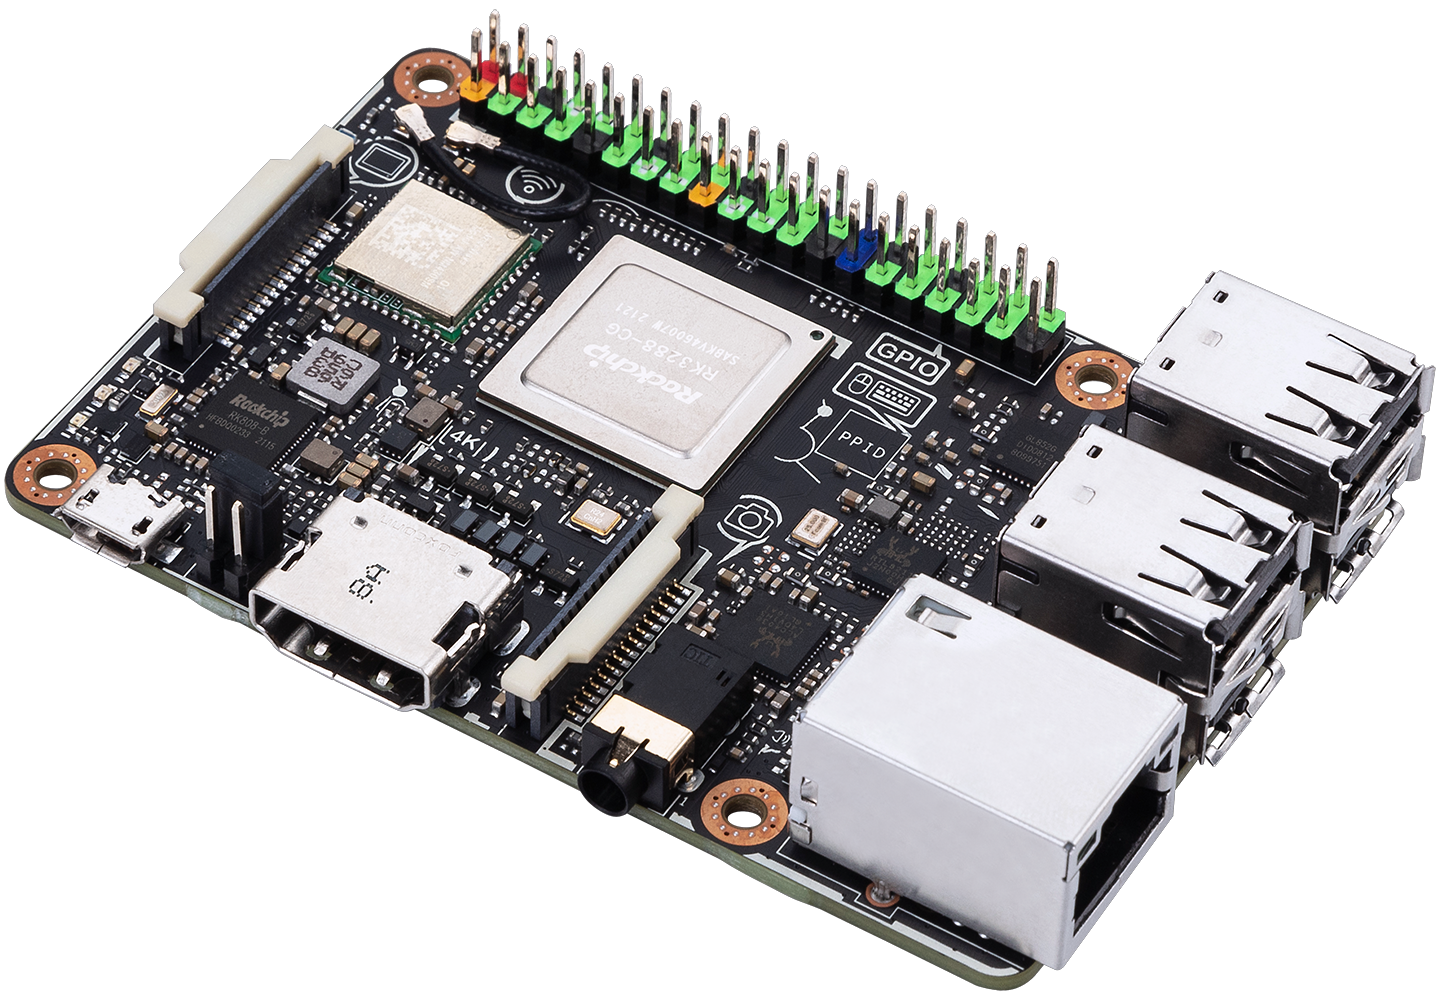 Asus Unveils Tinker Board R2.0 Powered by Rockchip RK3288 – A Small yet Powerful SBC